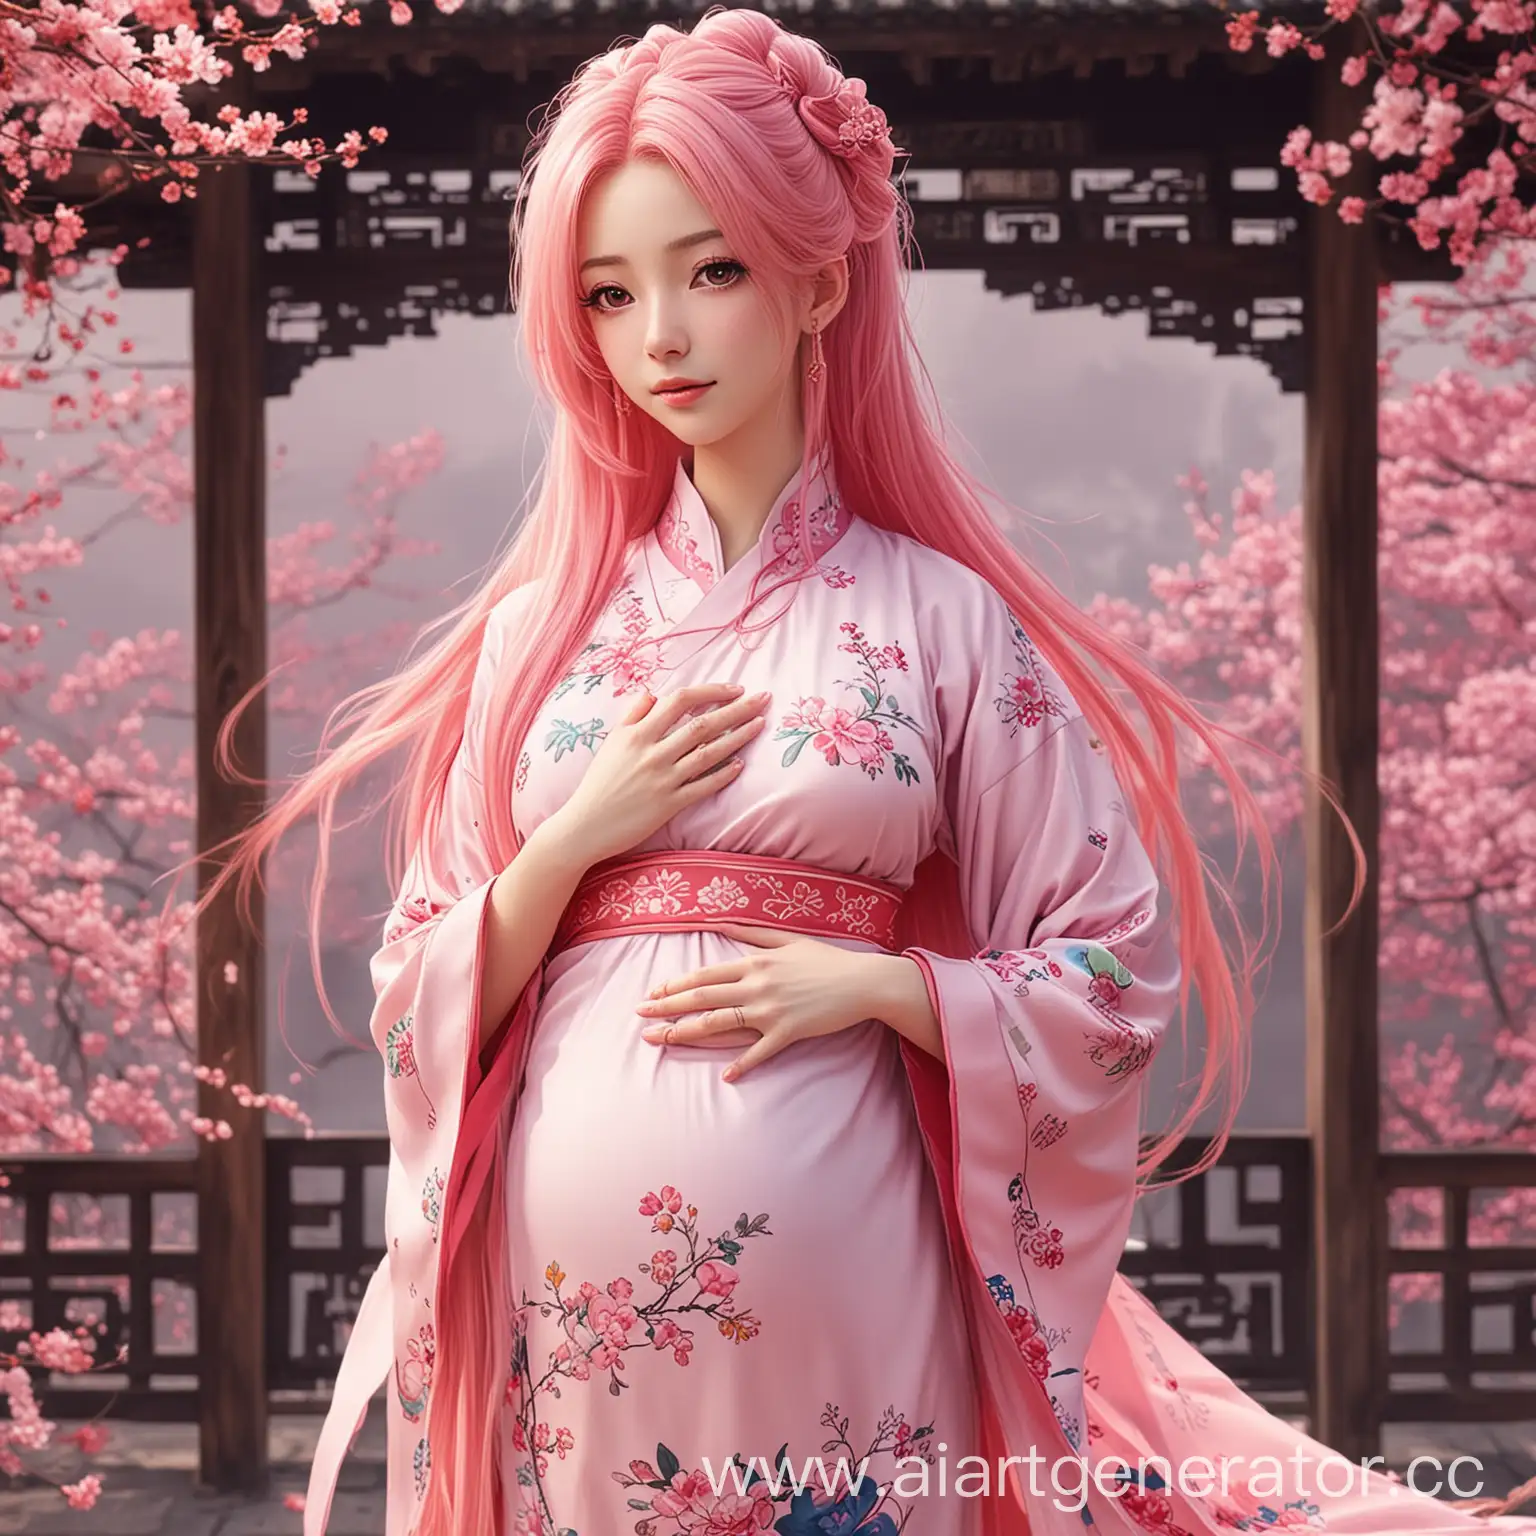 Pregnant-Anime-Woman-with-Long-Pink-Hair-in-Elegant-Chinese-Attire